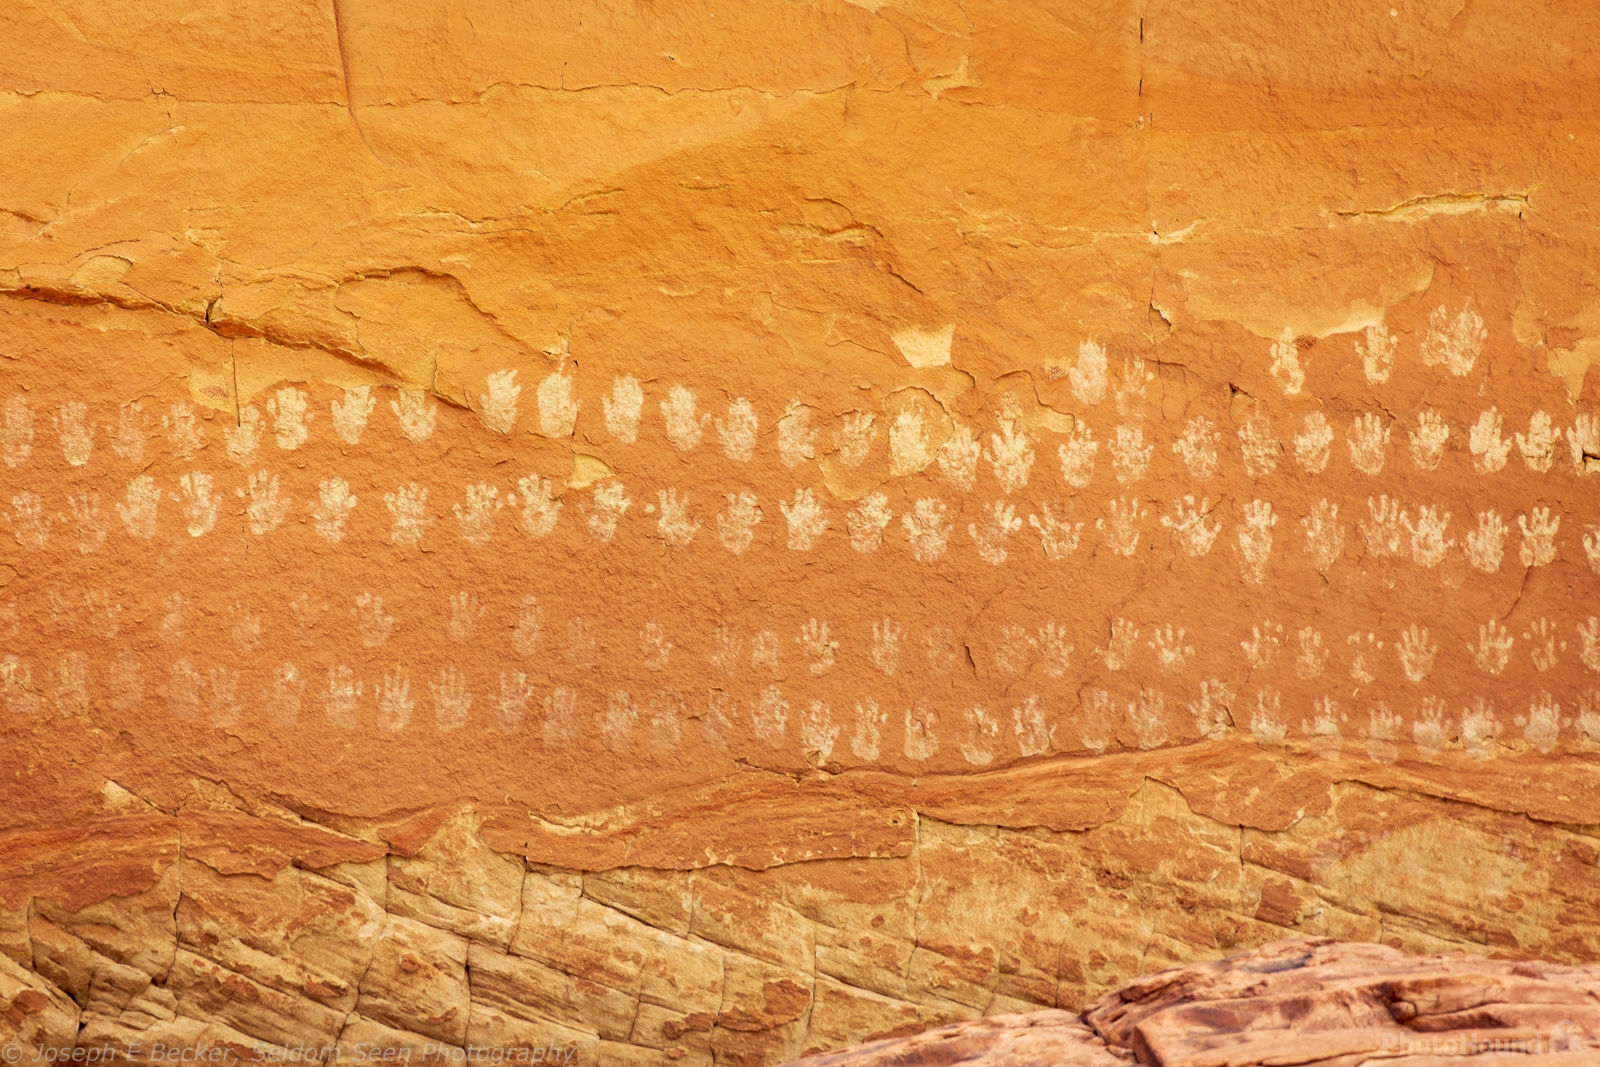 Image of Hundred Hands Pictograph by Joe Becker